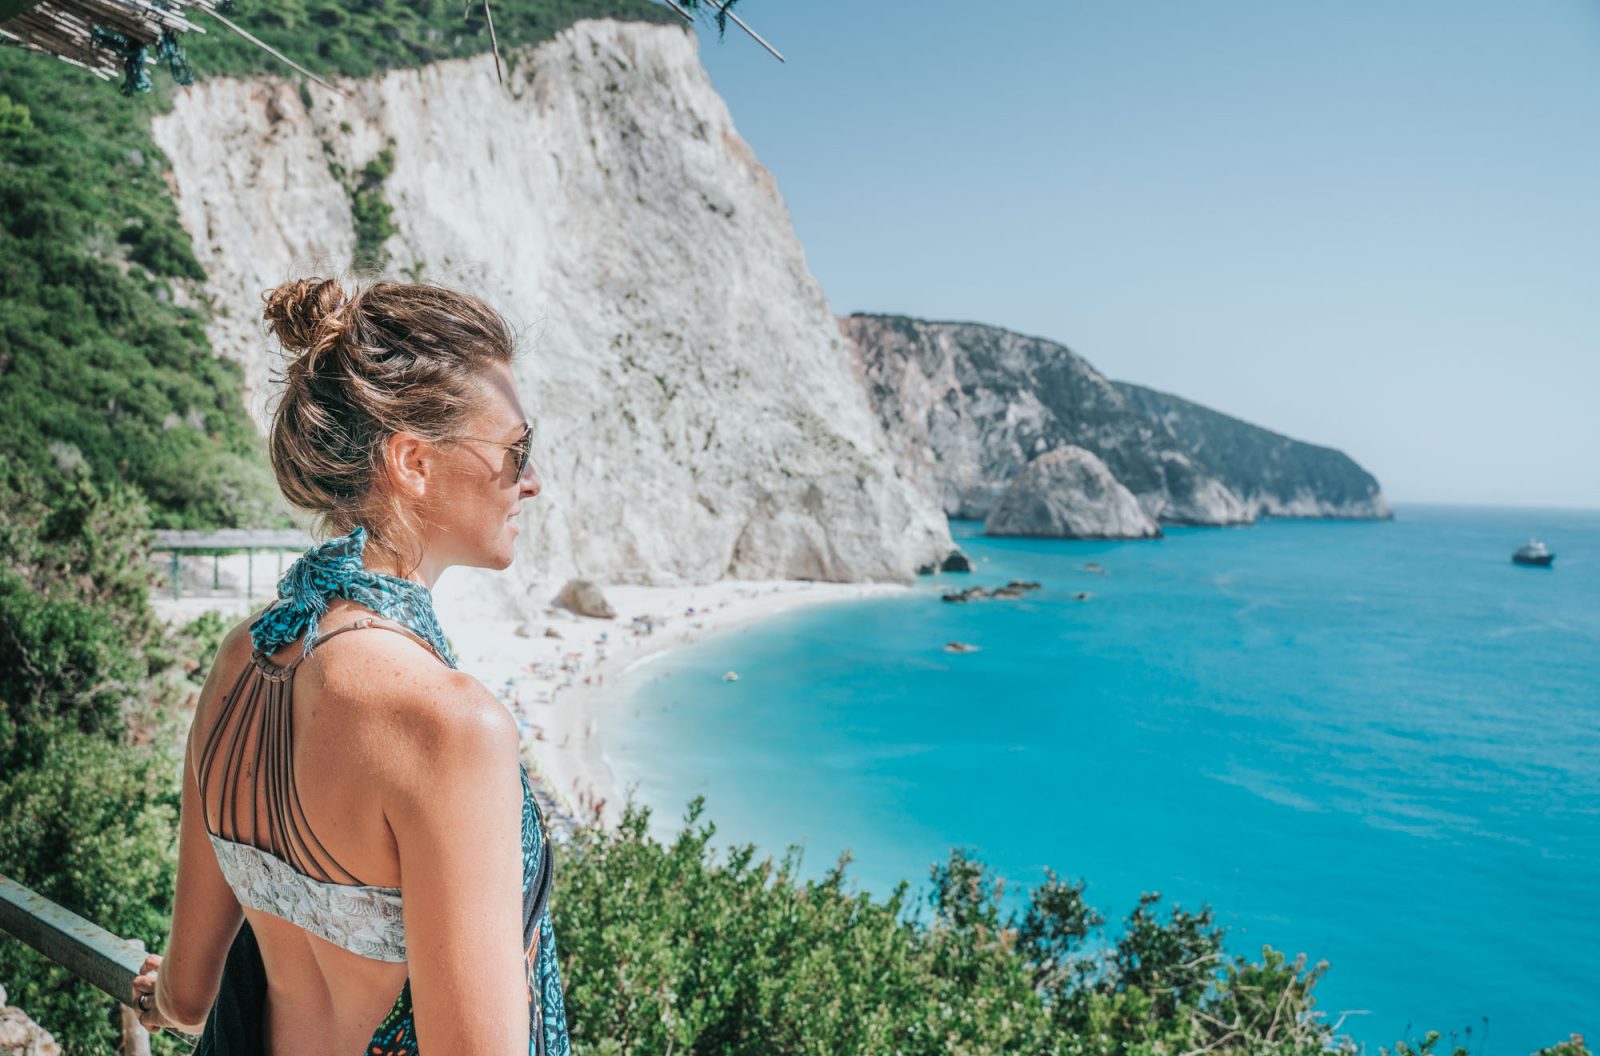 10 Stunning Lefkada Beaches That Will Make you Want to Visit this Lesser Known Island in Greece